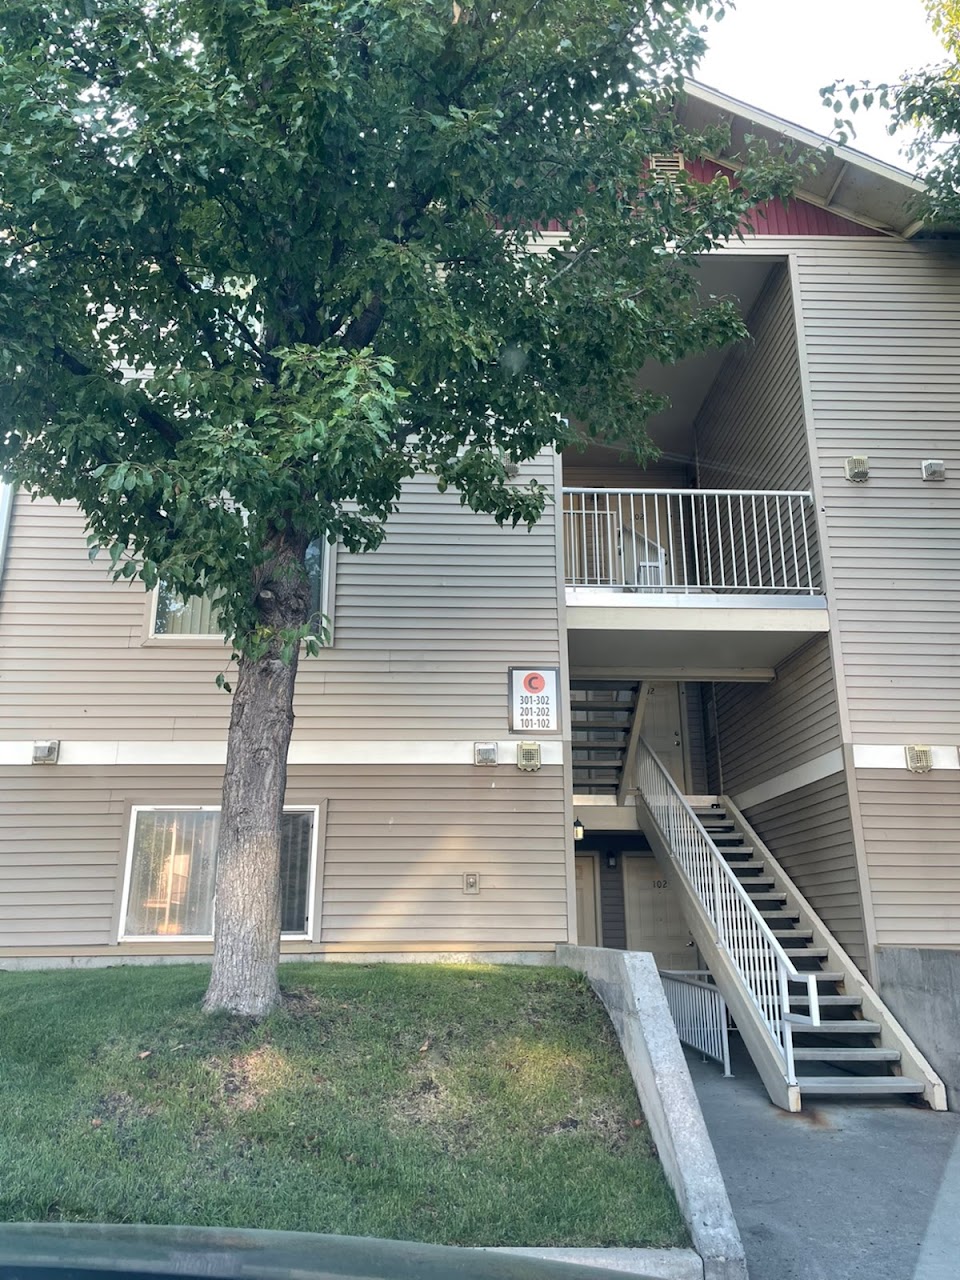 Photo of STONEGATE. Affordable housing located at 6102 ROAD 68 PASCO, WA 99301